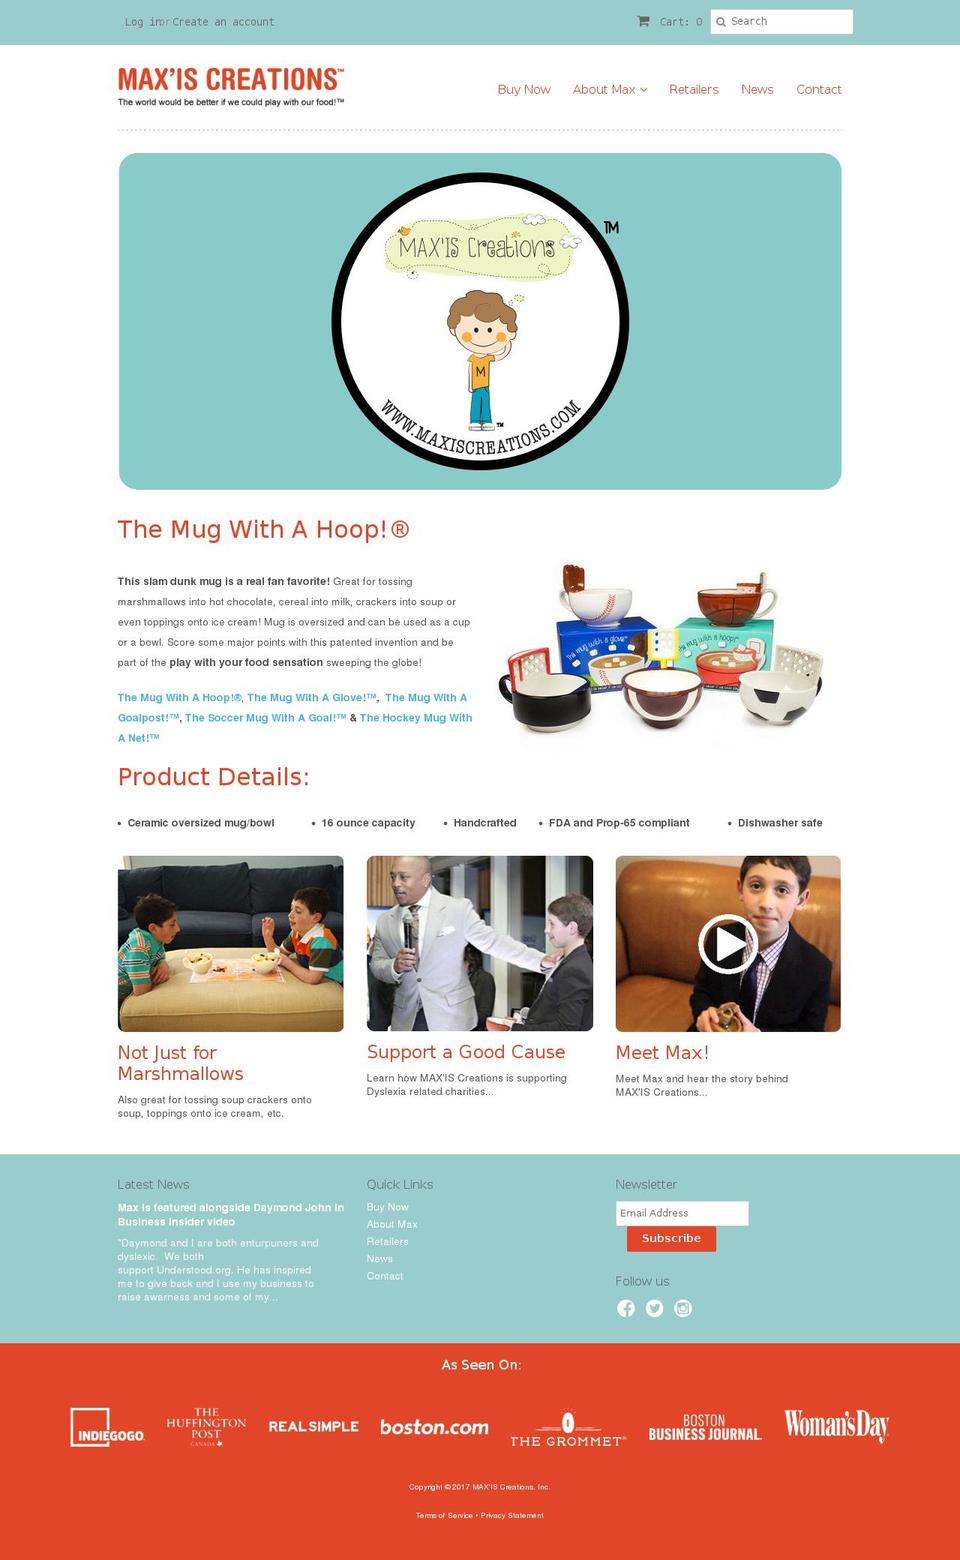 Ride Shopify theme site example maxiscreations.com